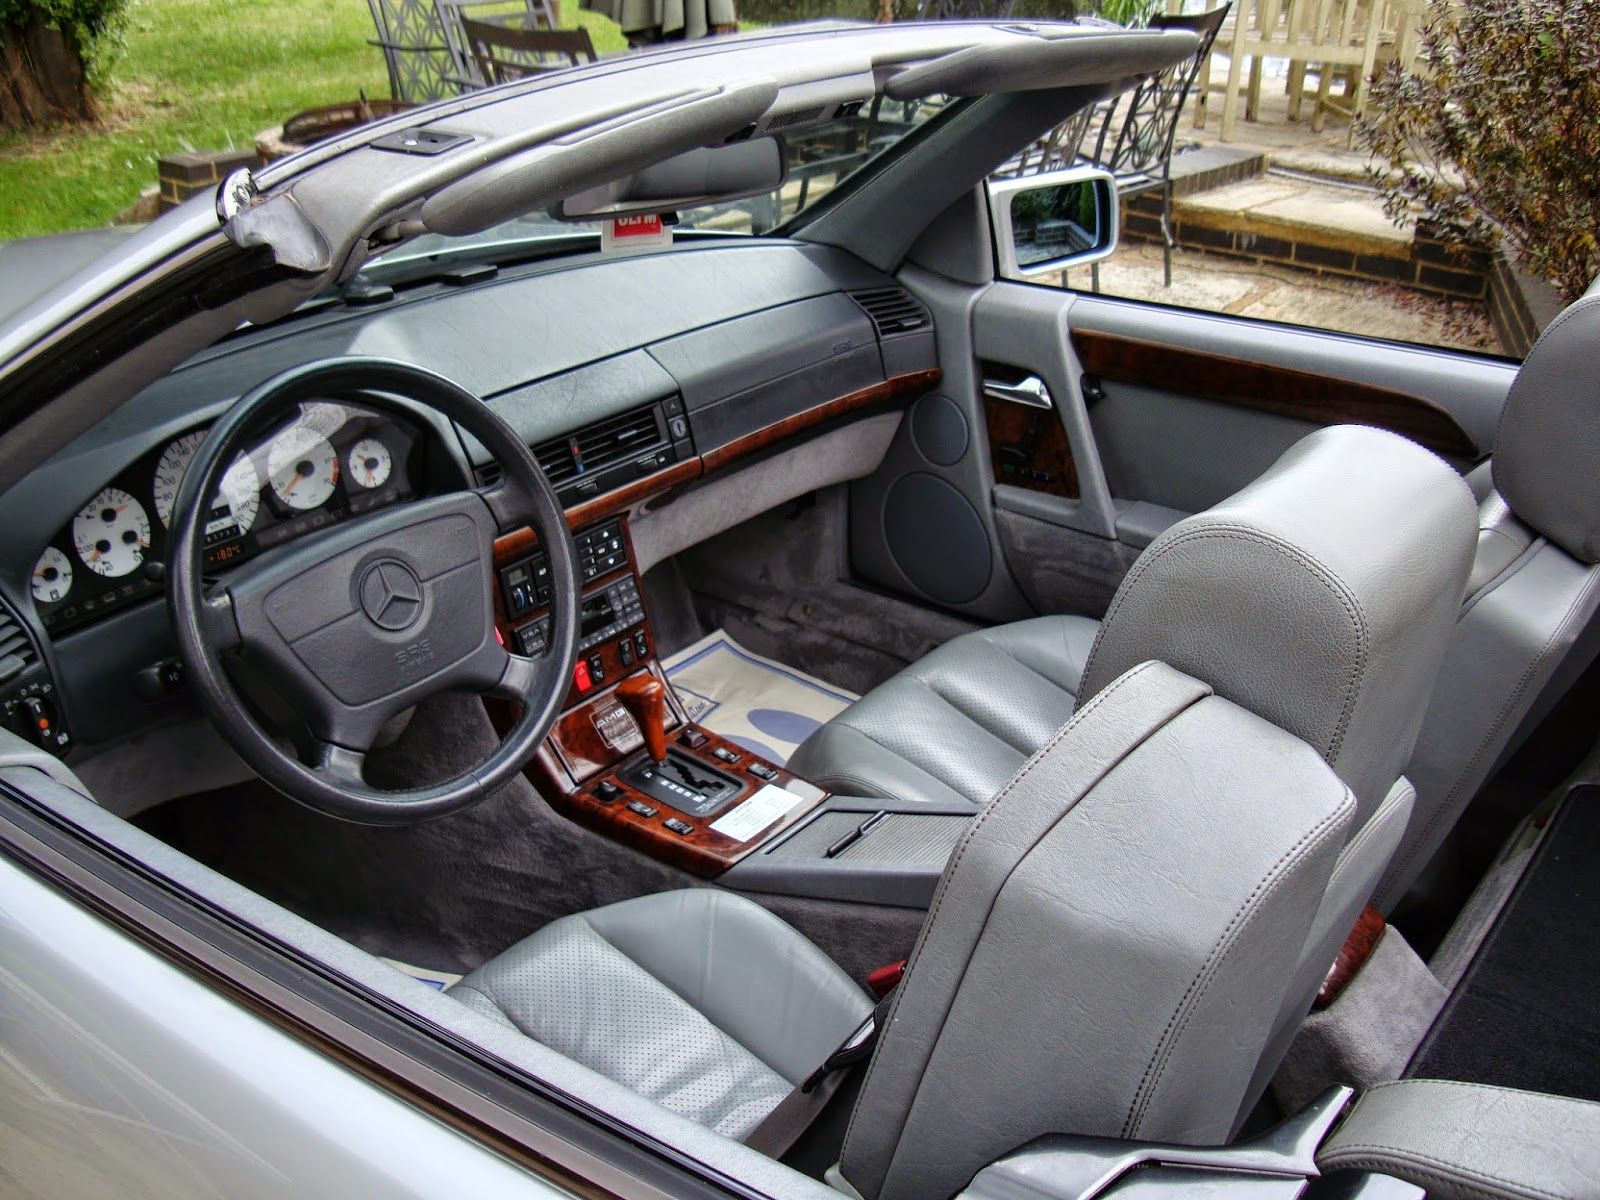 The Interior Of The Mercedes-AMG 500 SL 6.0